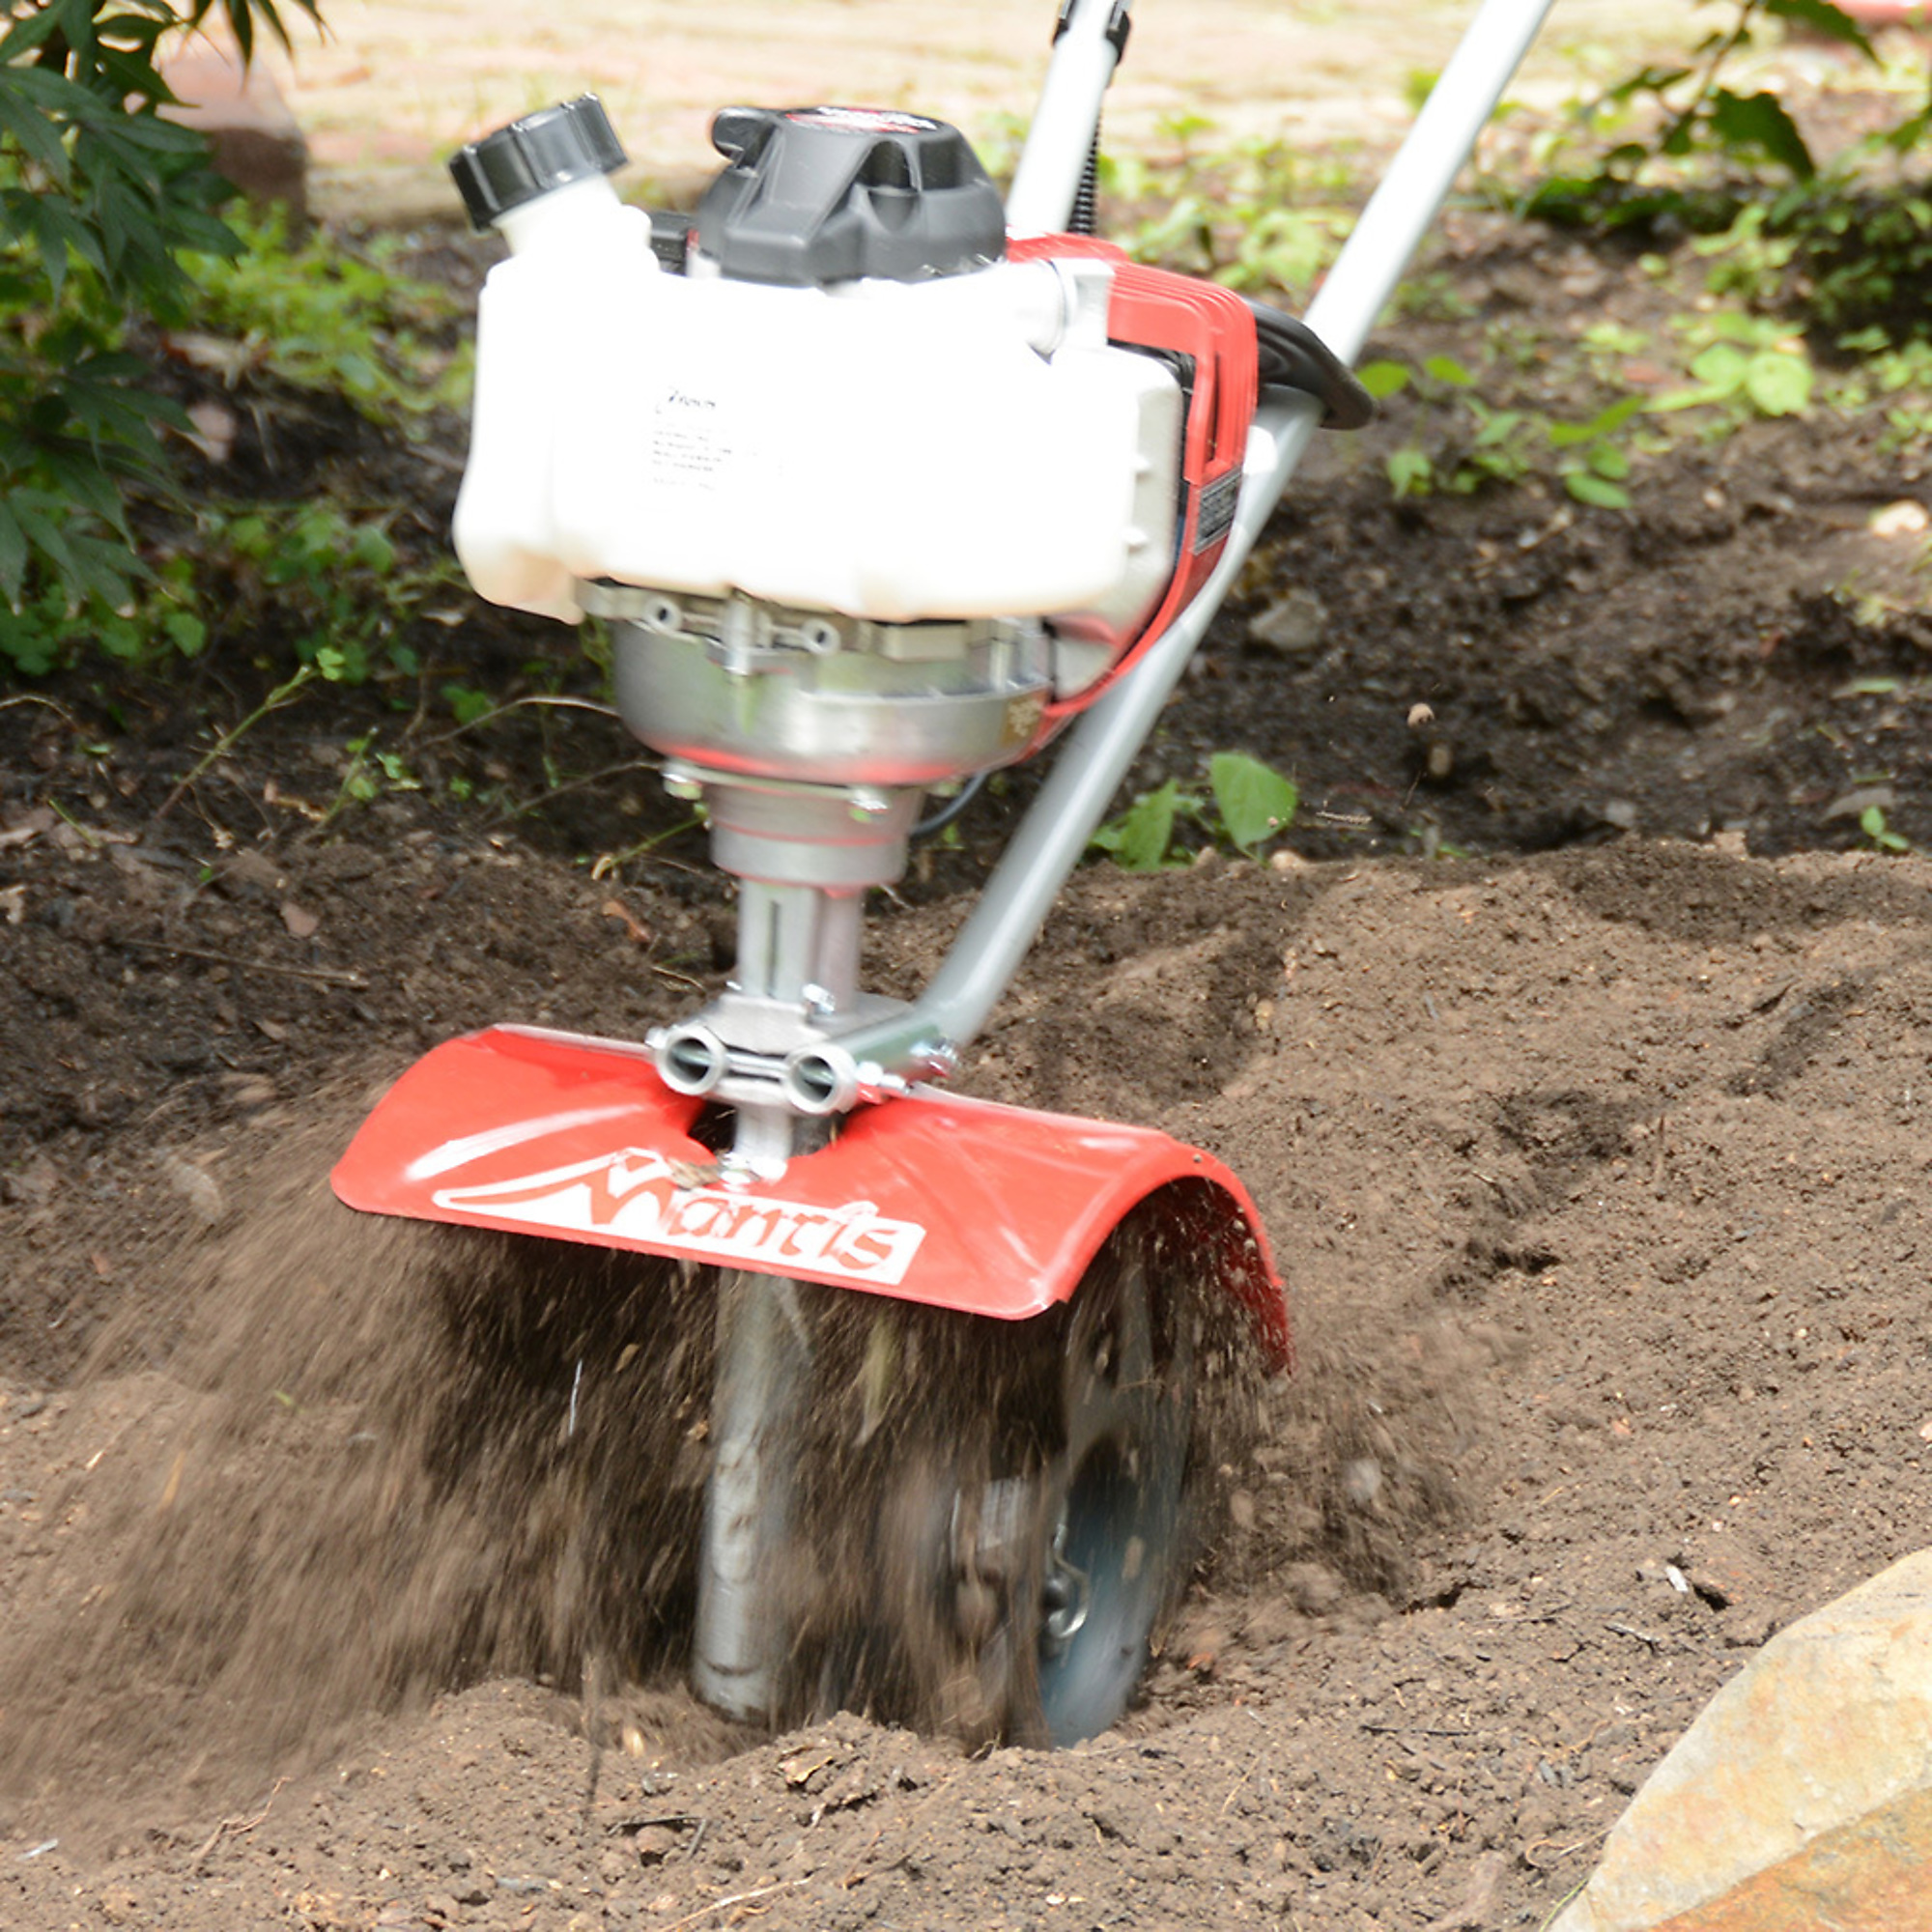 4-Cycle Tiller/Cultivator || Honda GX25 engine, Max. Working Width 9 in, Engine Displacement 25 cc, Model - Mantis 7268